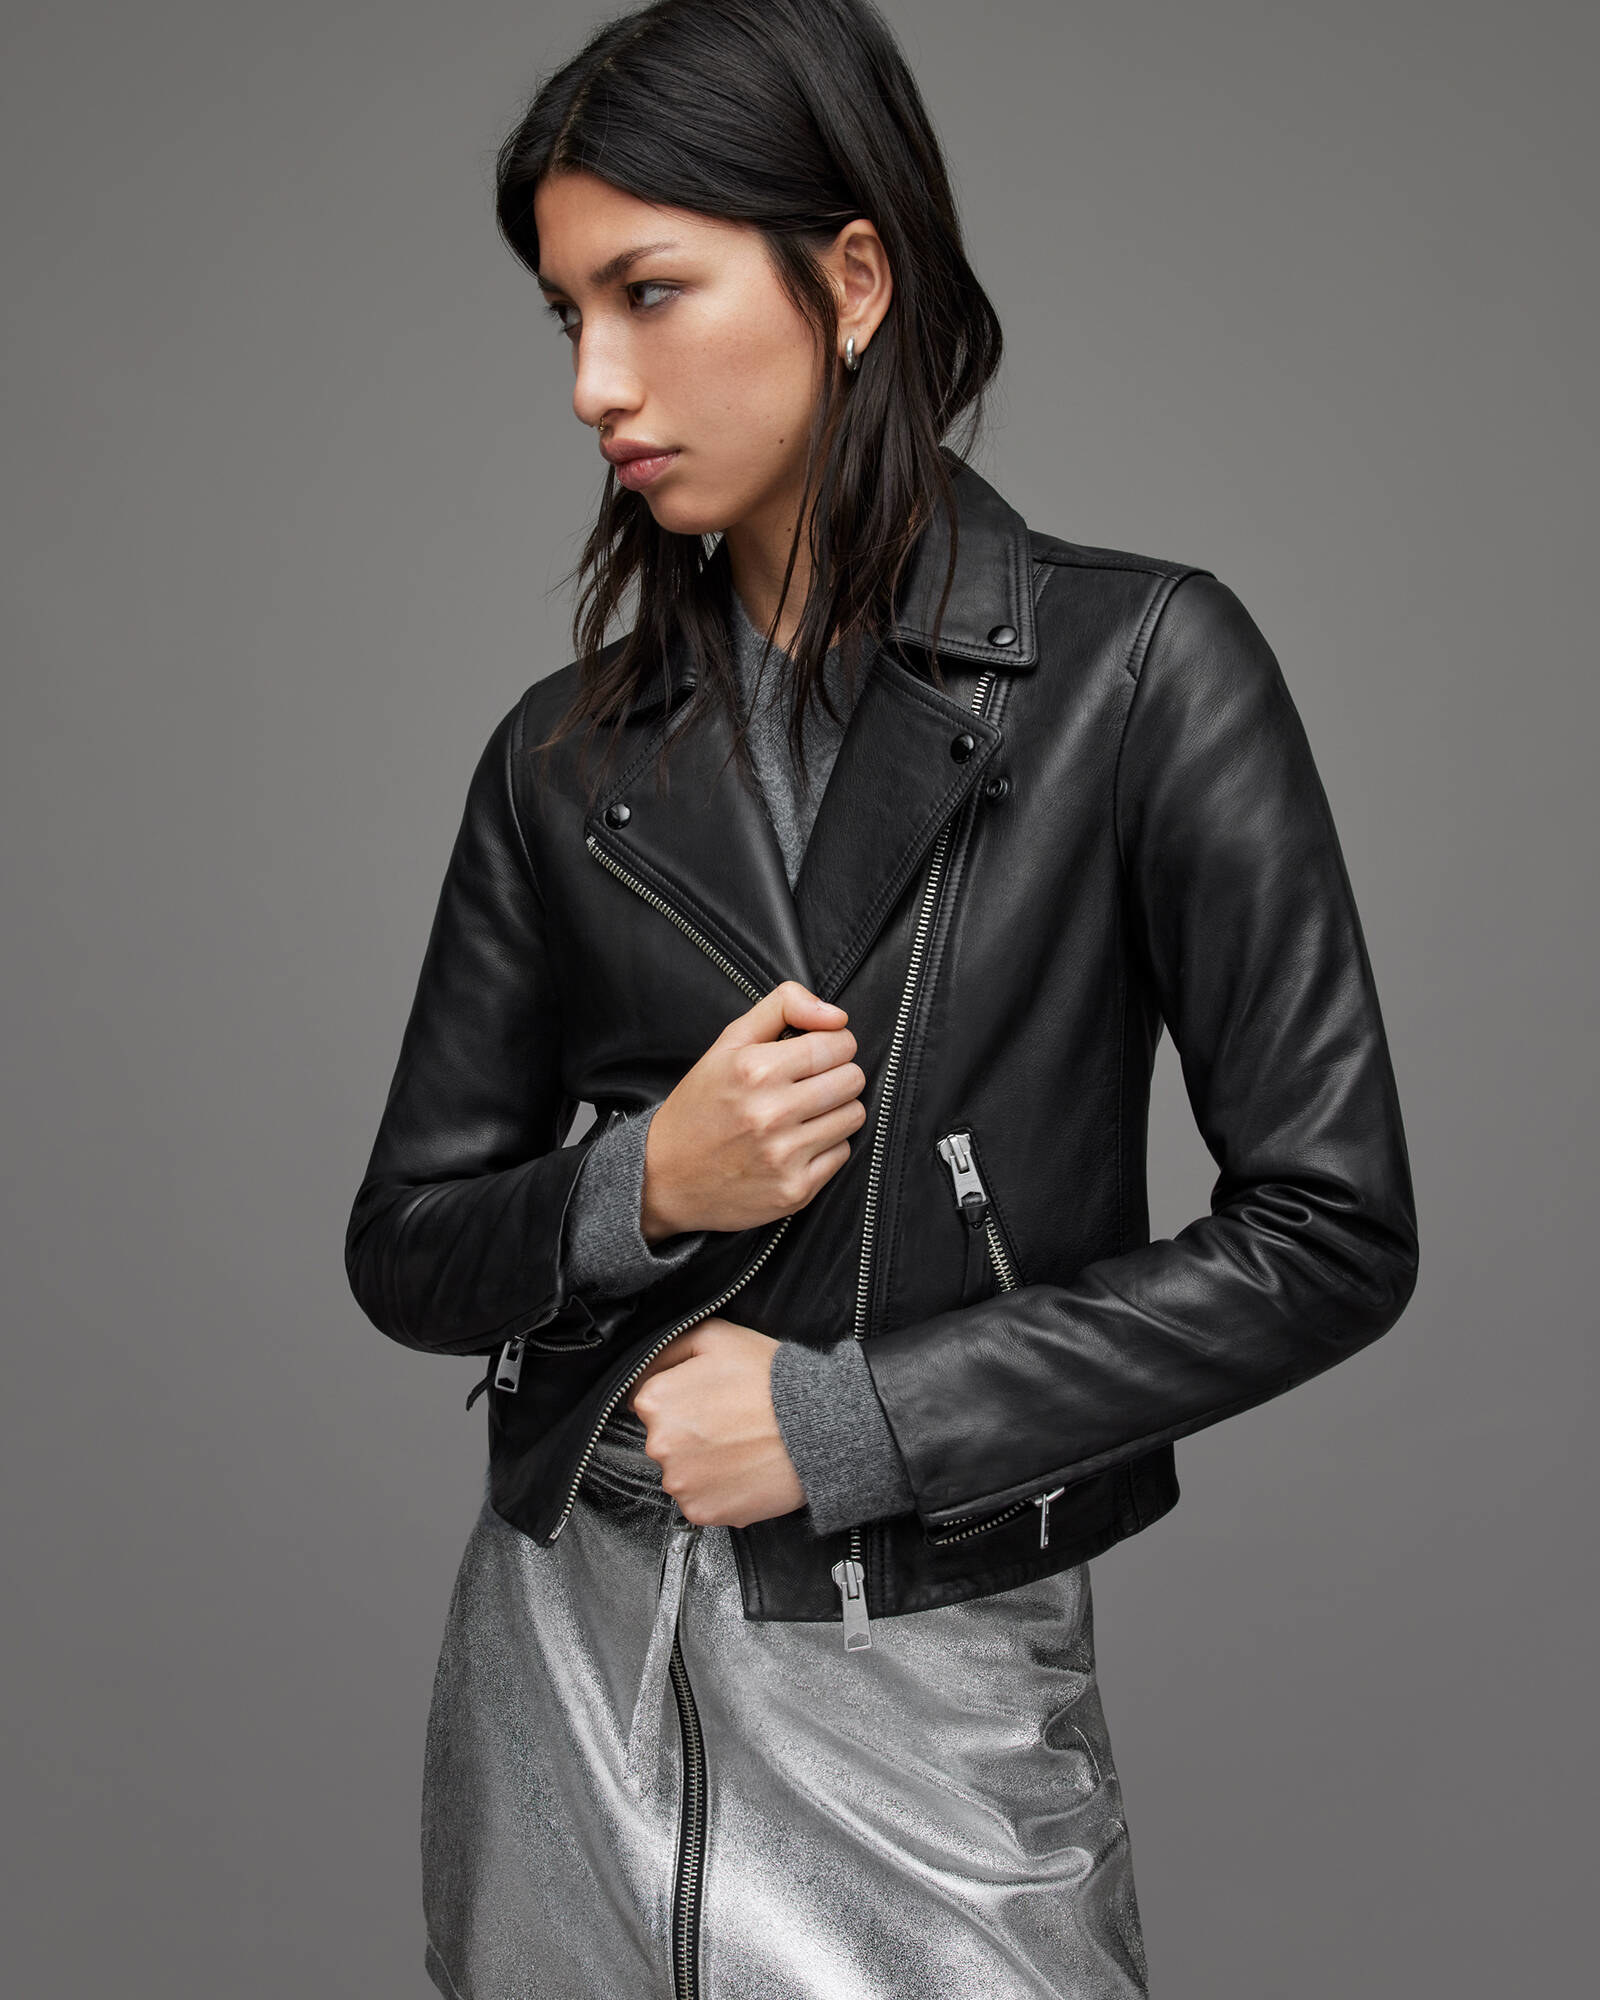 model in black leather jacket with silver hardware